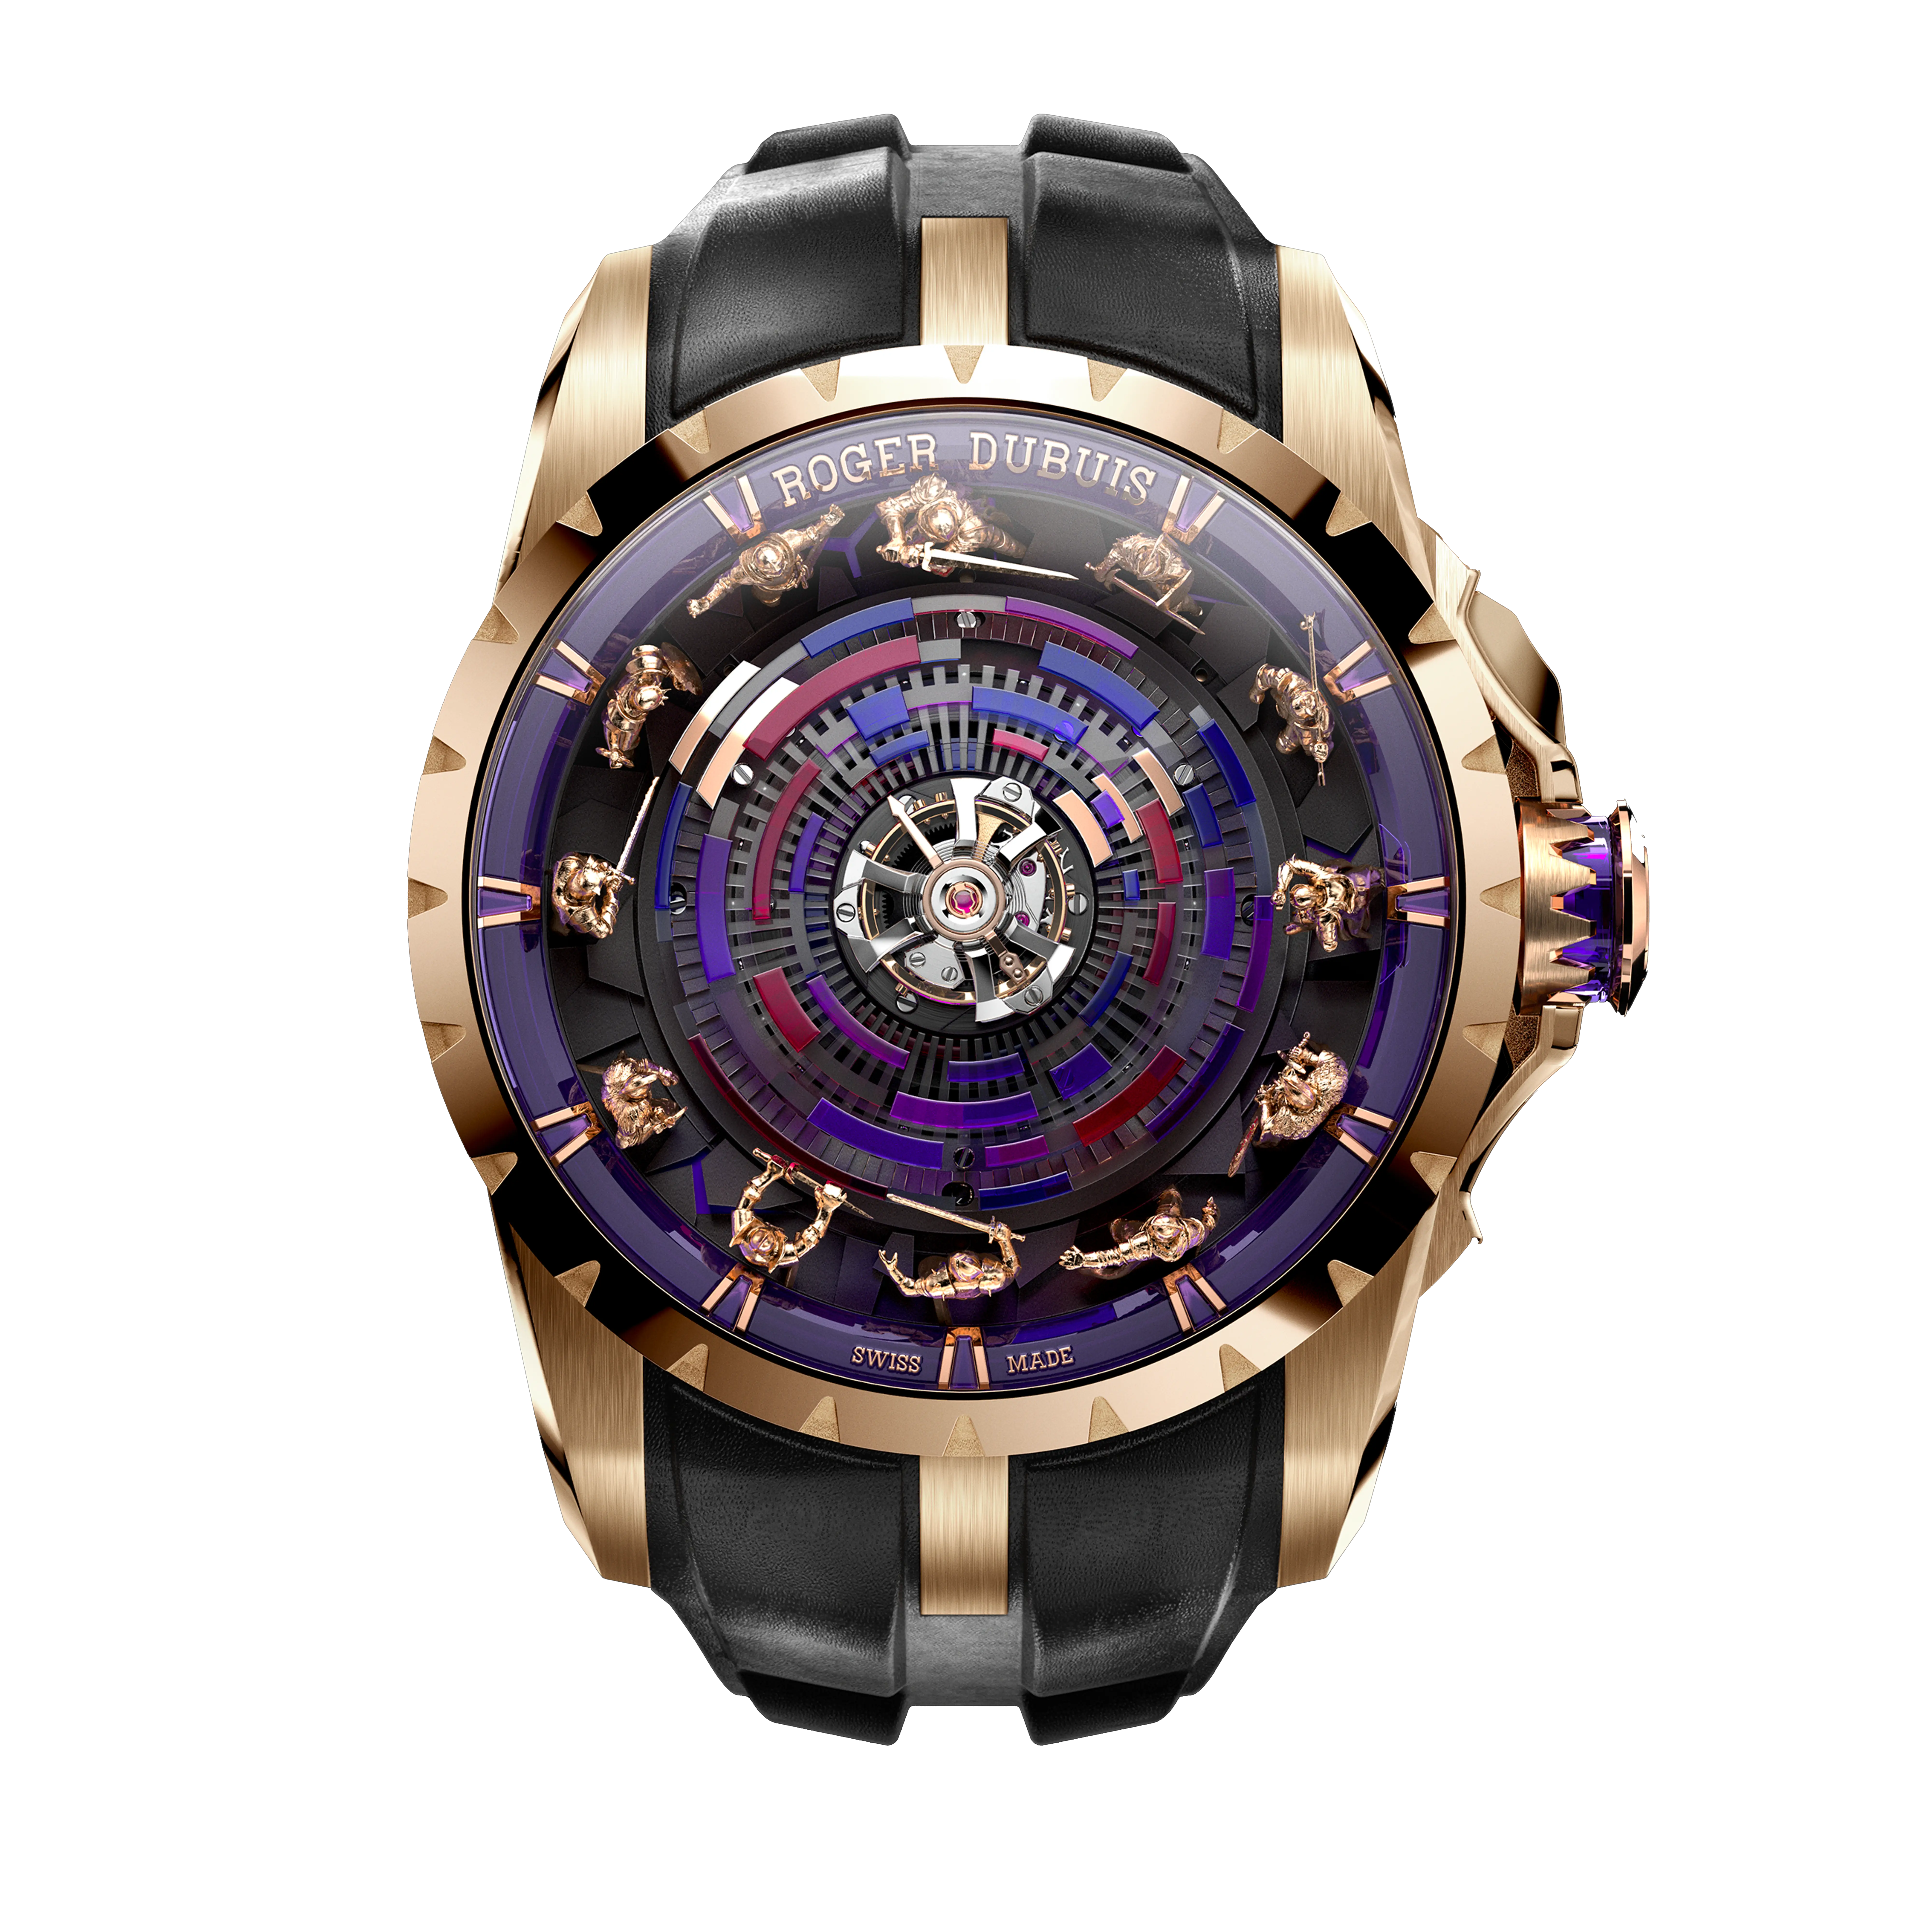 Roger Dubuis KNIGHTS OF THE ROUND TABLE MONOTOURBILLON DBEX1025 Pink Gold 18K, Manual-winding, 45mm